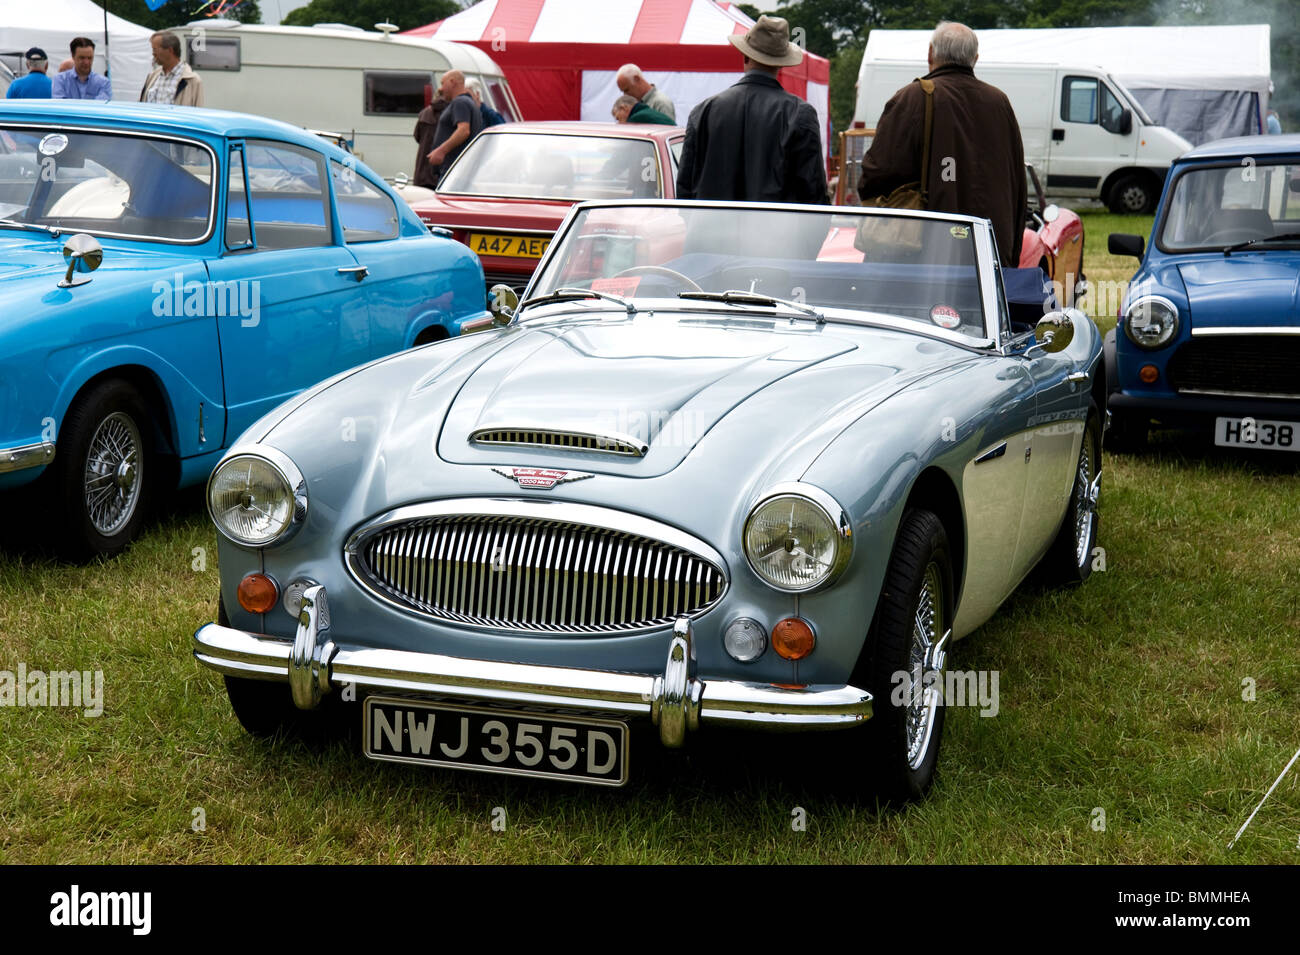 Austin Healey 3000 Mk3 on display at Heskin Hall traction engine and vintage vehicle rally Stock Photo